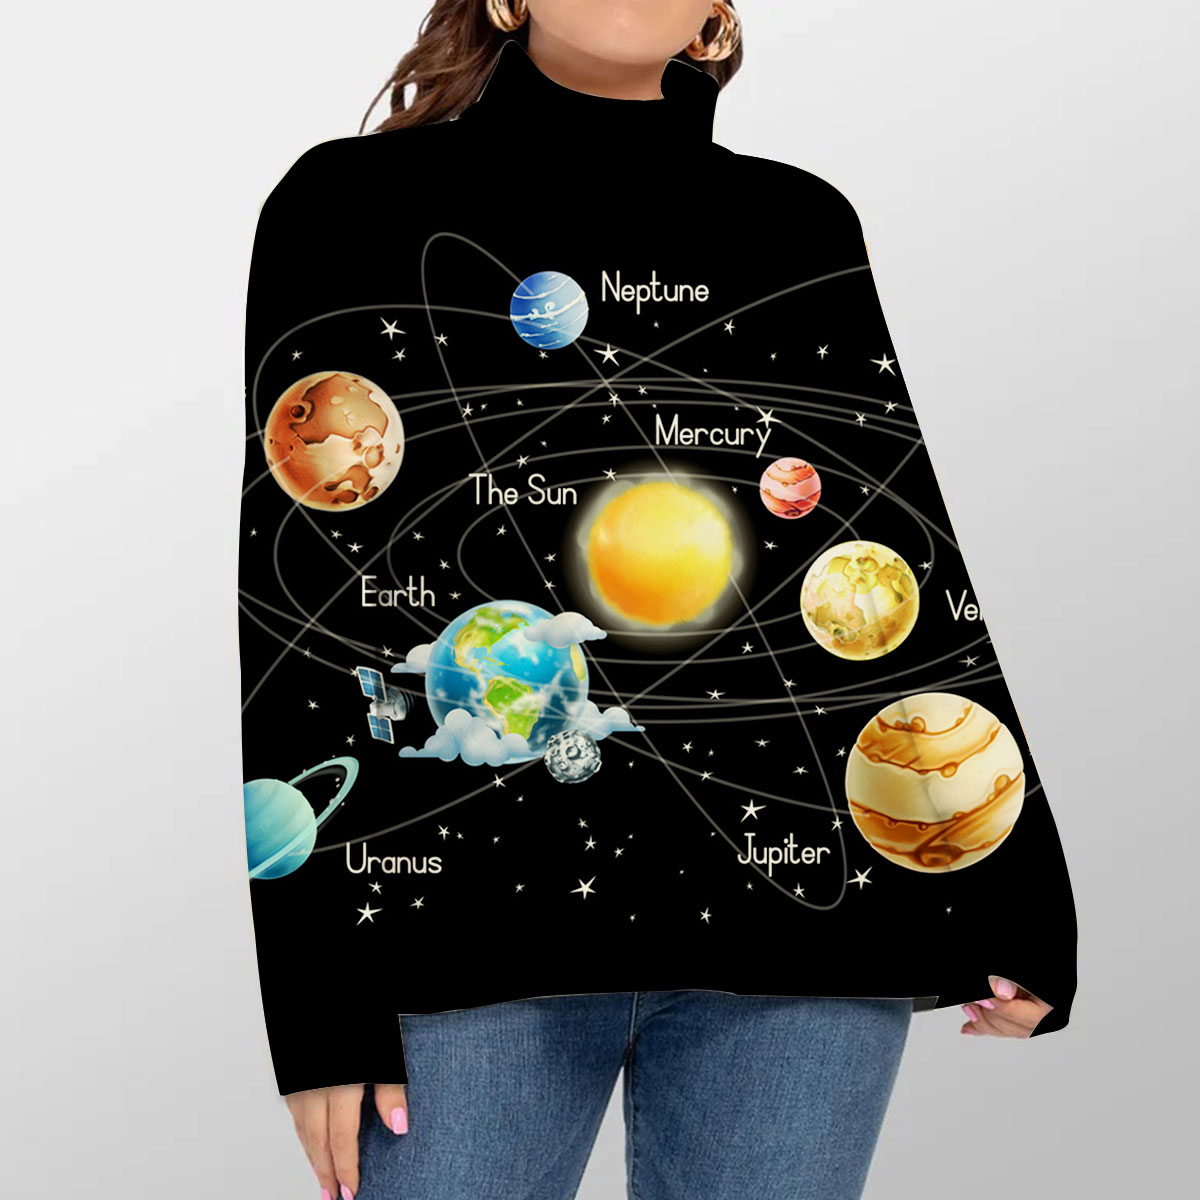 Our Planet Turtleneck Sweater